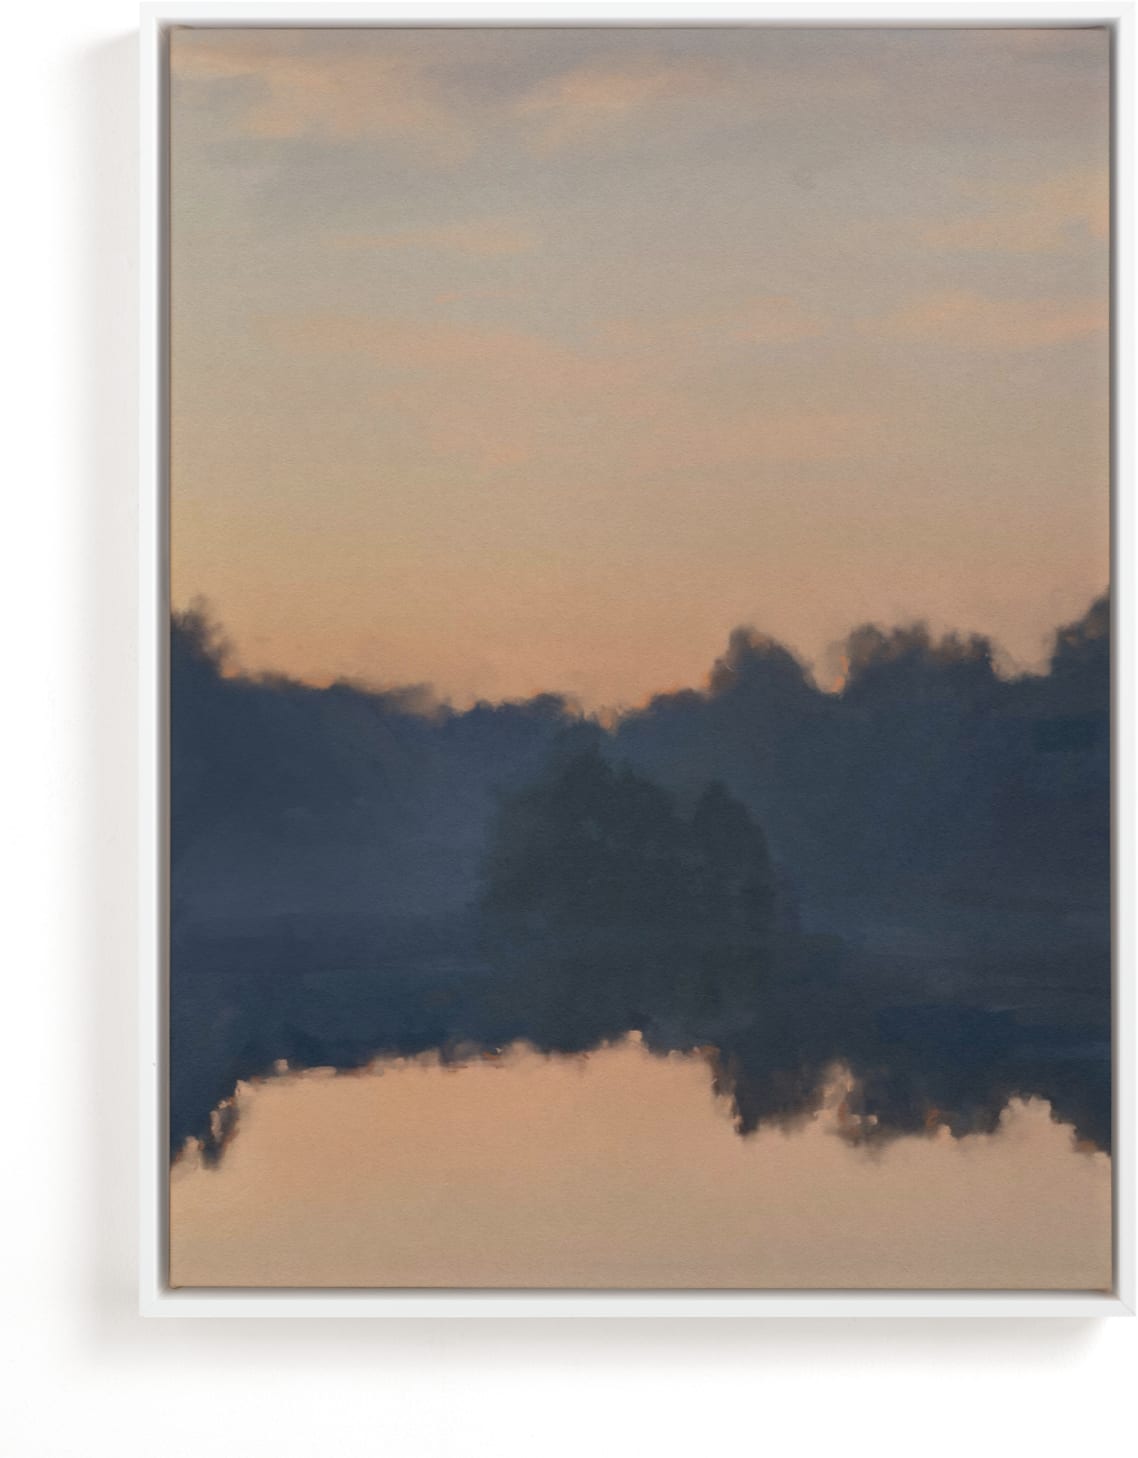 This is a blue art by Christa Kimble called Reflection at Sunset.